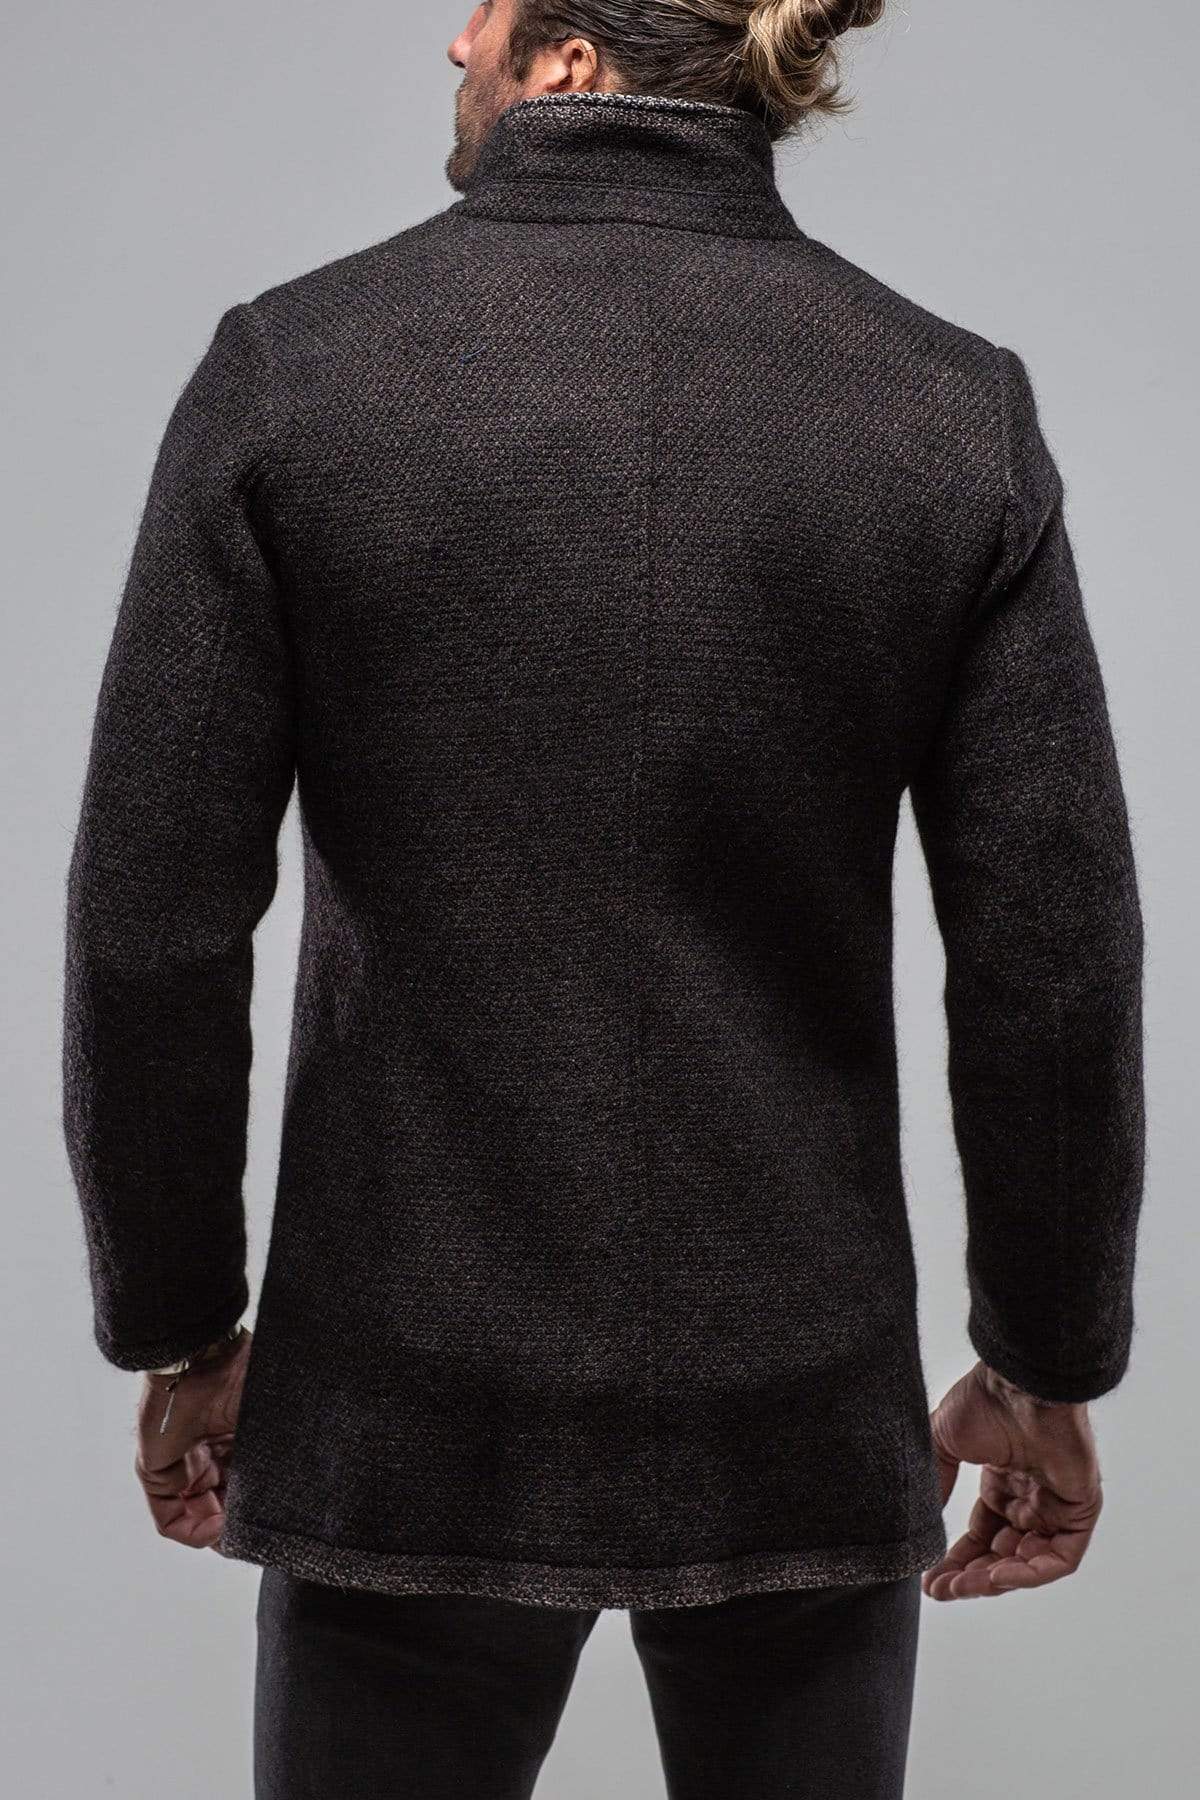 St. Christoff Jacket In Charcoal - AXEL'S